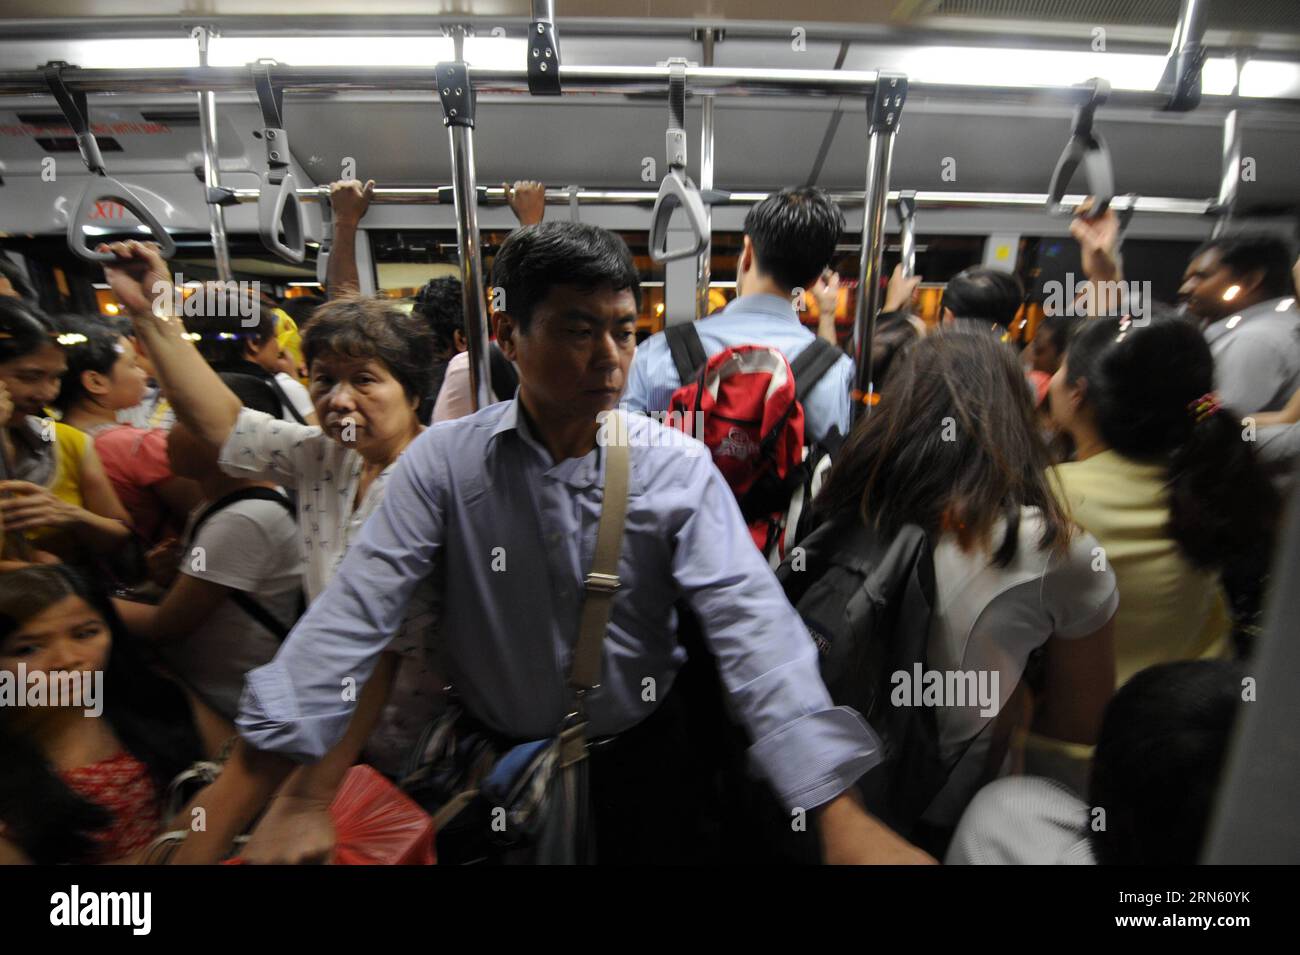 (150707) -- SINGAPORE, July 7, 2015 -- People squeeze onto a bus near Singapore s Dhoby Ghaut MRT Station on July 7, 2015. Train services on Singapore s North-South and East-West MRT Lines were disrupted at evening peak hours due to electrical malfunction on Tuesday, the second time after the East-West MRT Line malfunction in March. ) SINGAPORE-MRT-ELECTRICAL MALFUNCTION ThenxChihxWey PUBLICATIONxNOTxINxCHN   150707 Singapore July 7 2015 Celebrities Squeeze onto a Bus Near Singapore S  Ghaut MRI Station ON July 7 2015 Train Services ON Singapore S North South and East WEST MRI Lines Were disru Stock Photo